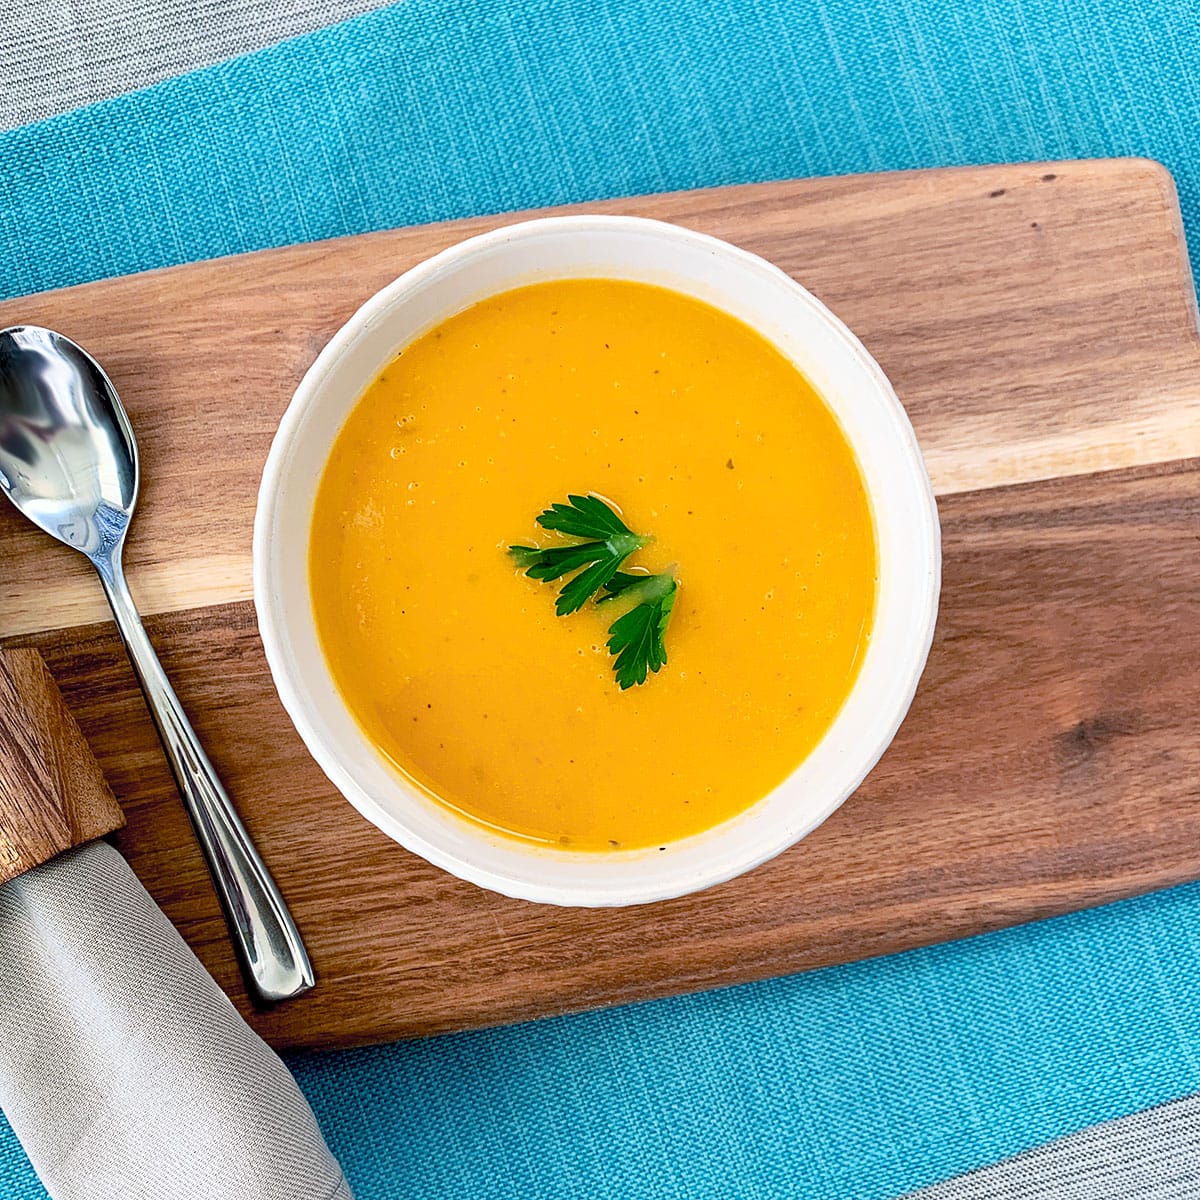 These butternut squash soup recipes are just the thing to make on a cold fa...